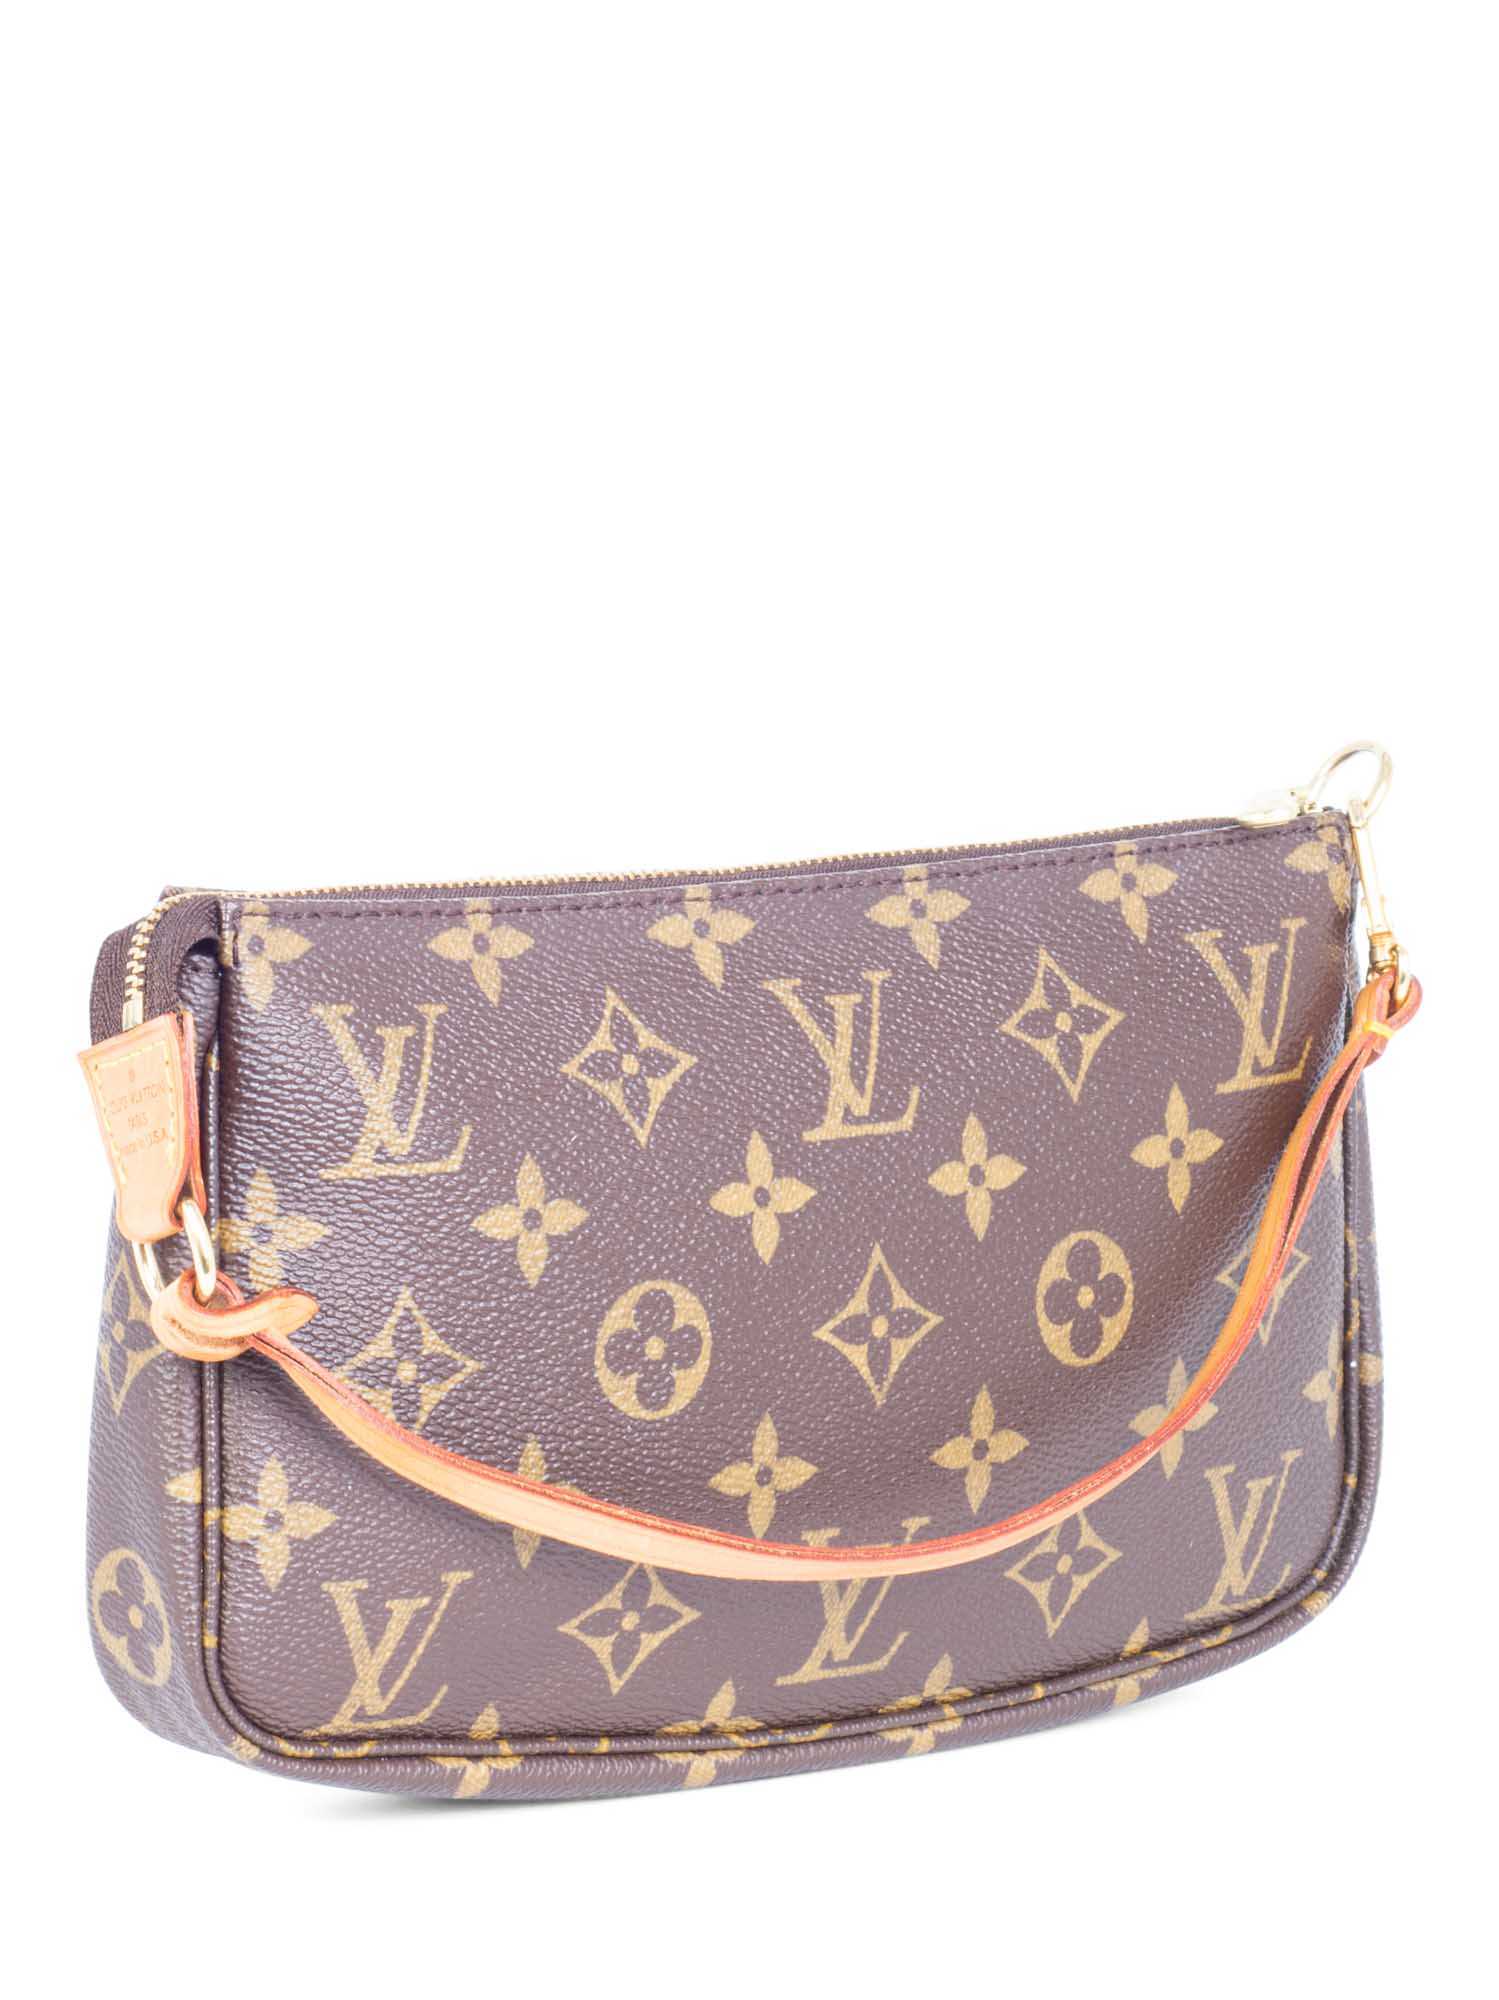 How To Authenticate Louis Vuitton  7 Best Ways To Spot A Fake